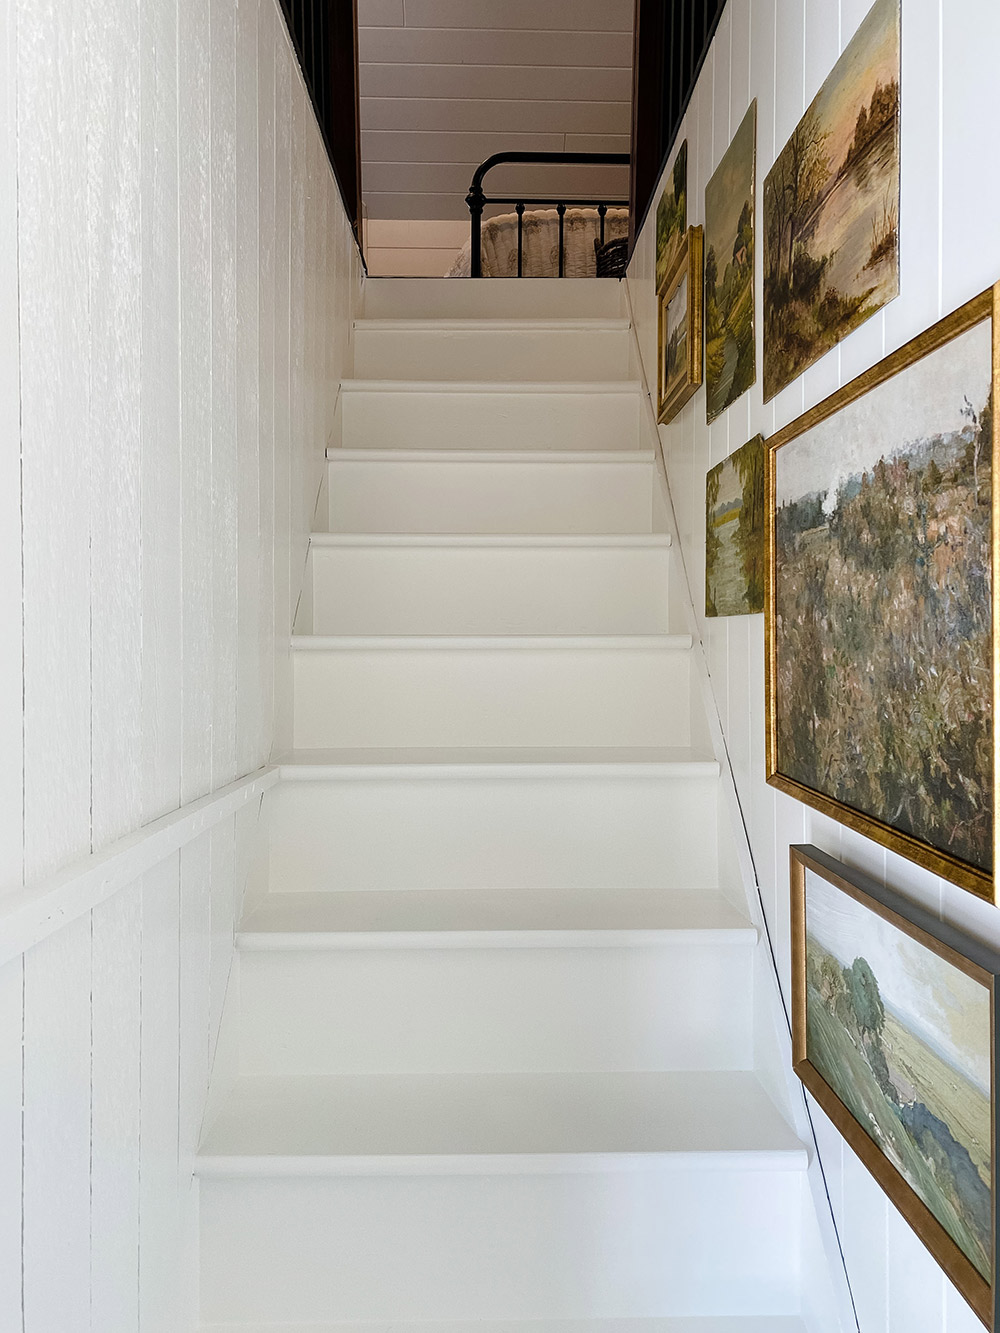 Freshly painted white staircase with framed paintings on right wall.